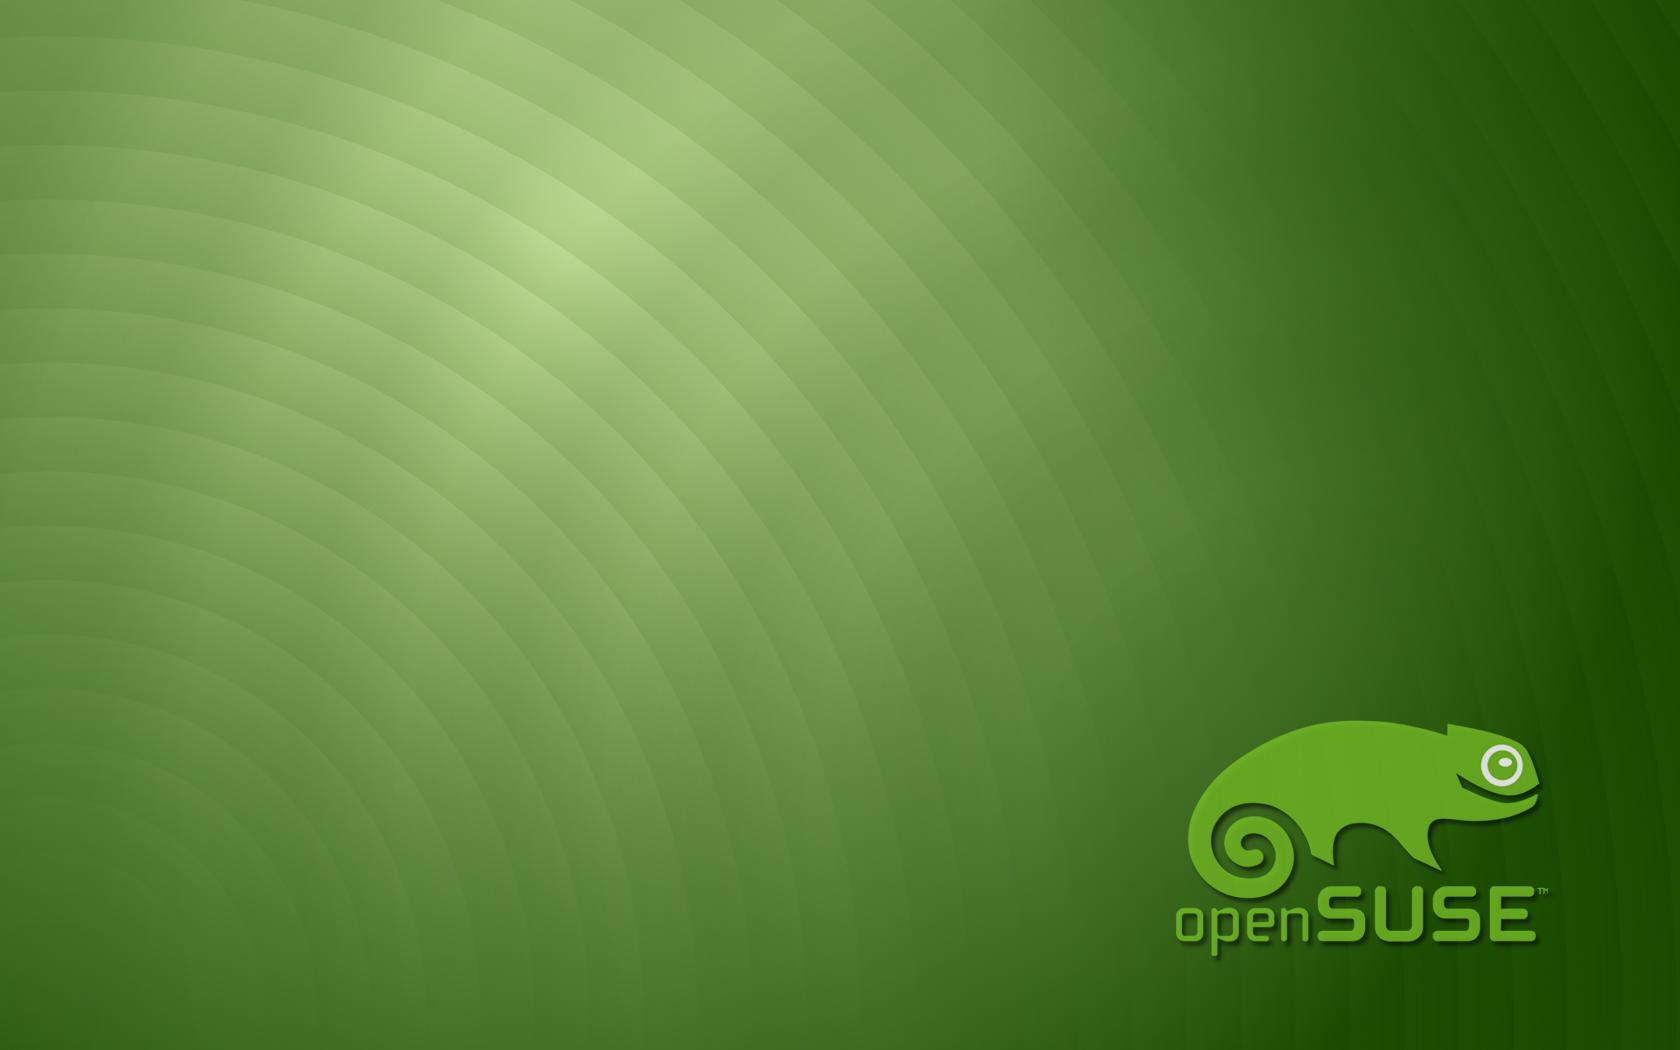 opensuse wallpaper 7145 - Image And Wallpaper free to